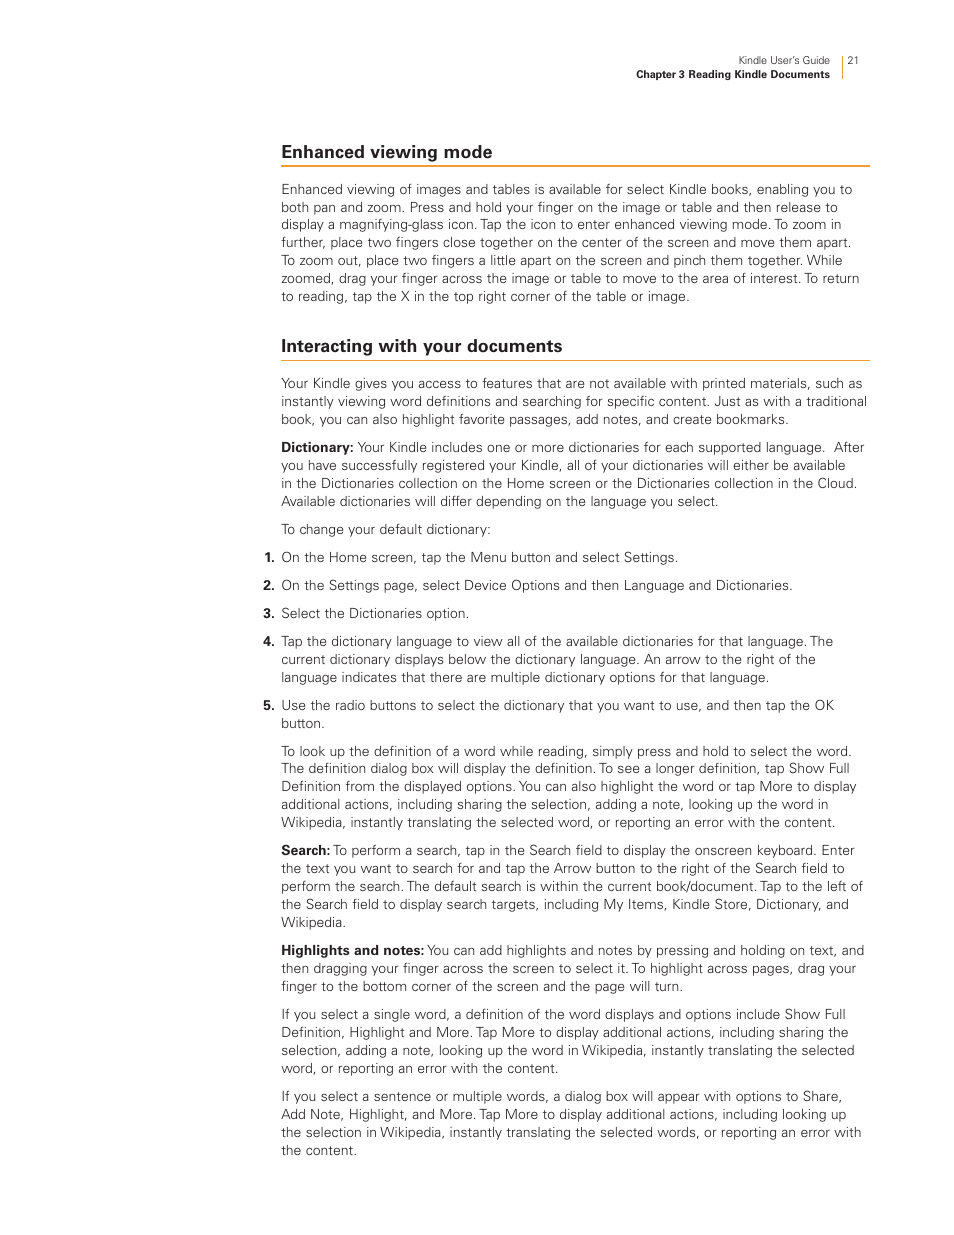 Enhanced viewing mode, Interacting with your documents | Kindle Touch 3G User Manual | Page 21 / 36